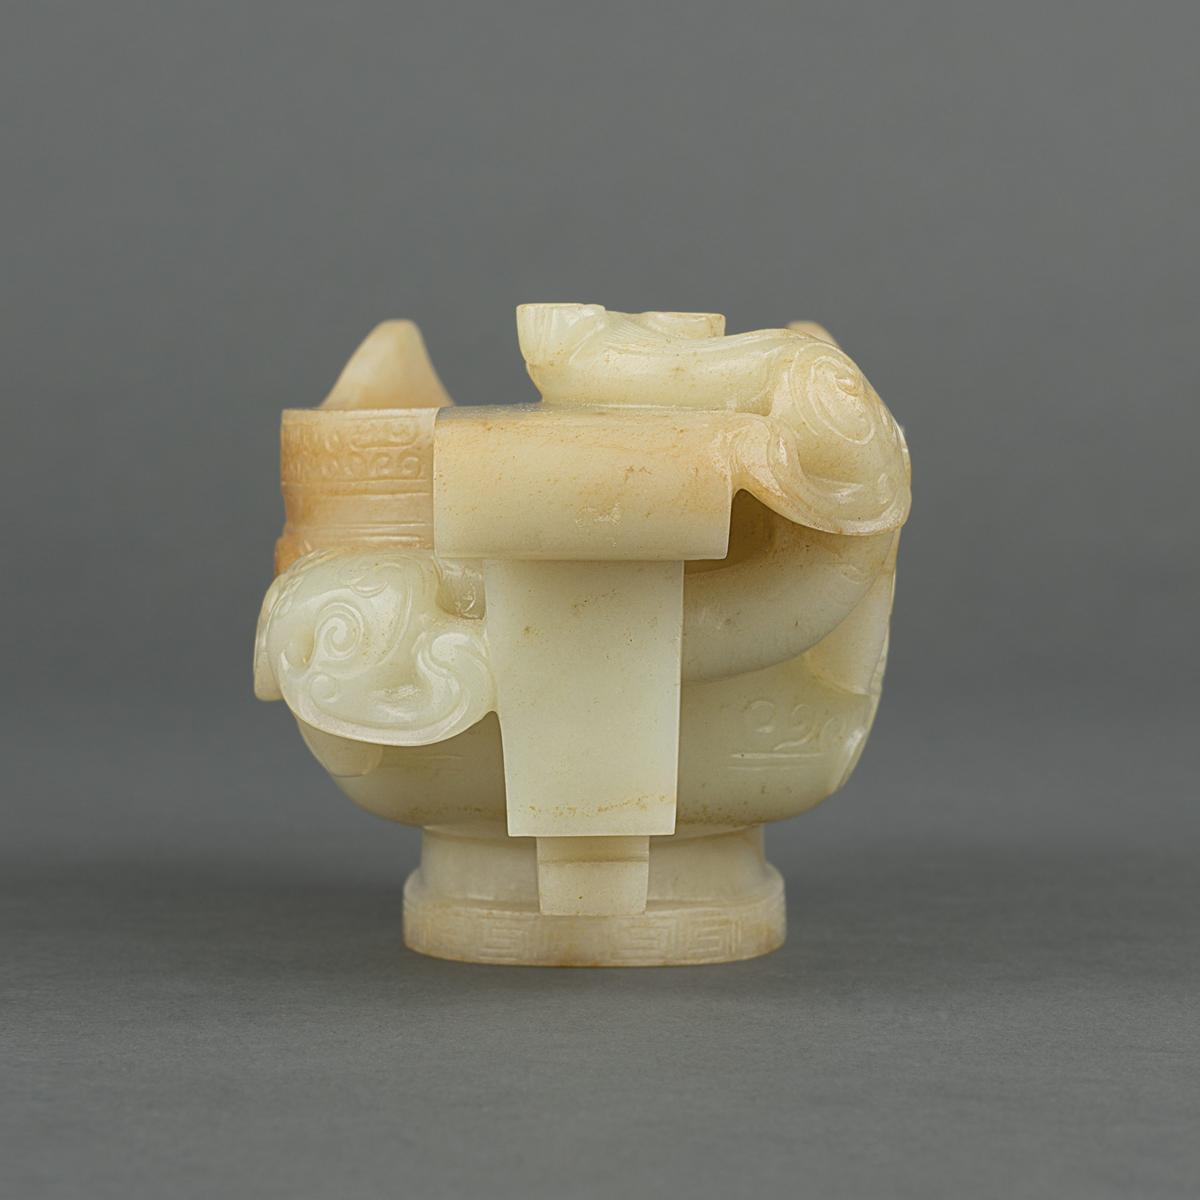 Chinese jade pouring vessel, yi, Late Ming/early Qing dynasty, 17th century